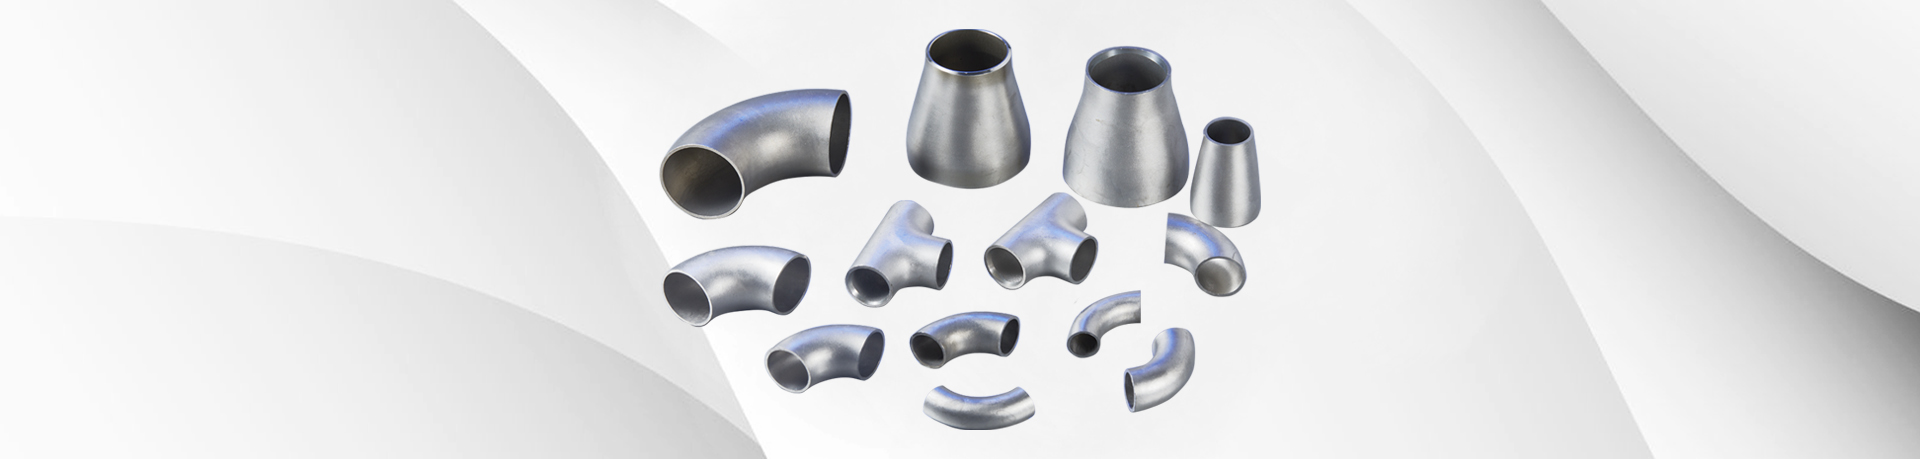 Stainless Steel Weld Caps